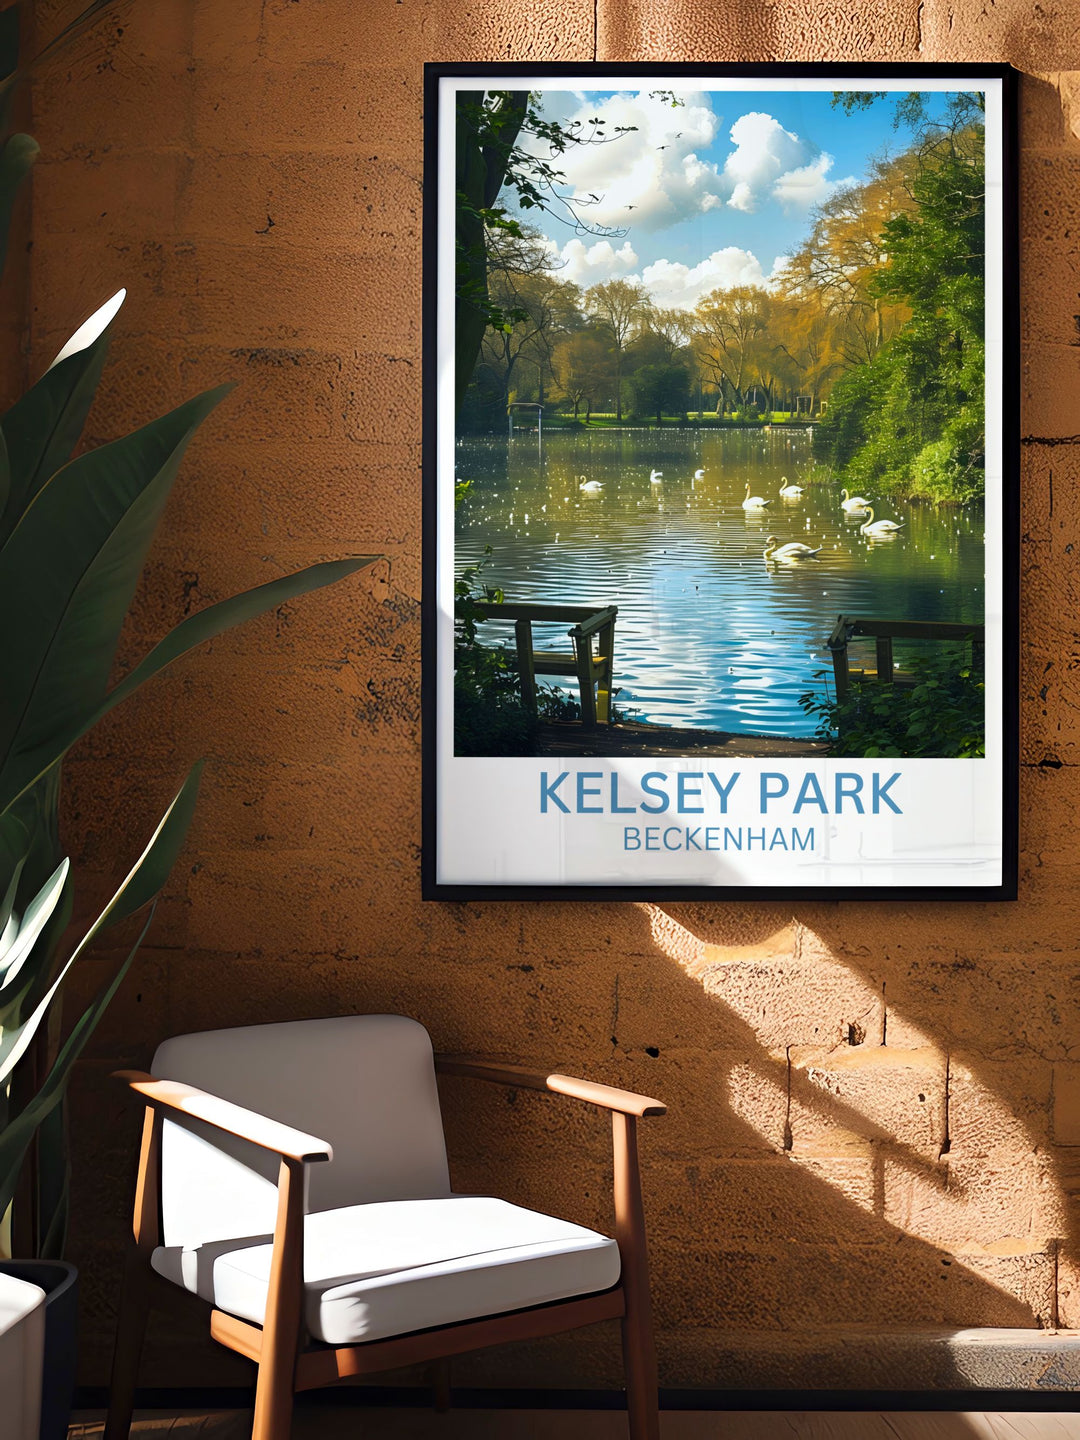 Beckenham Place Park canvas print focusing on the scenic beauty of The Lake during a sunset ideal for home or office decor